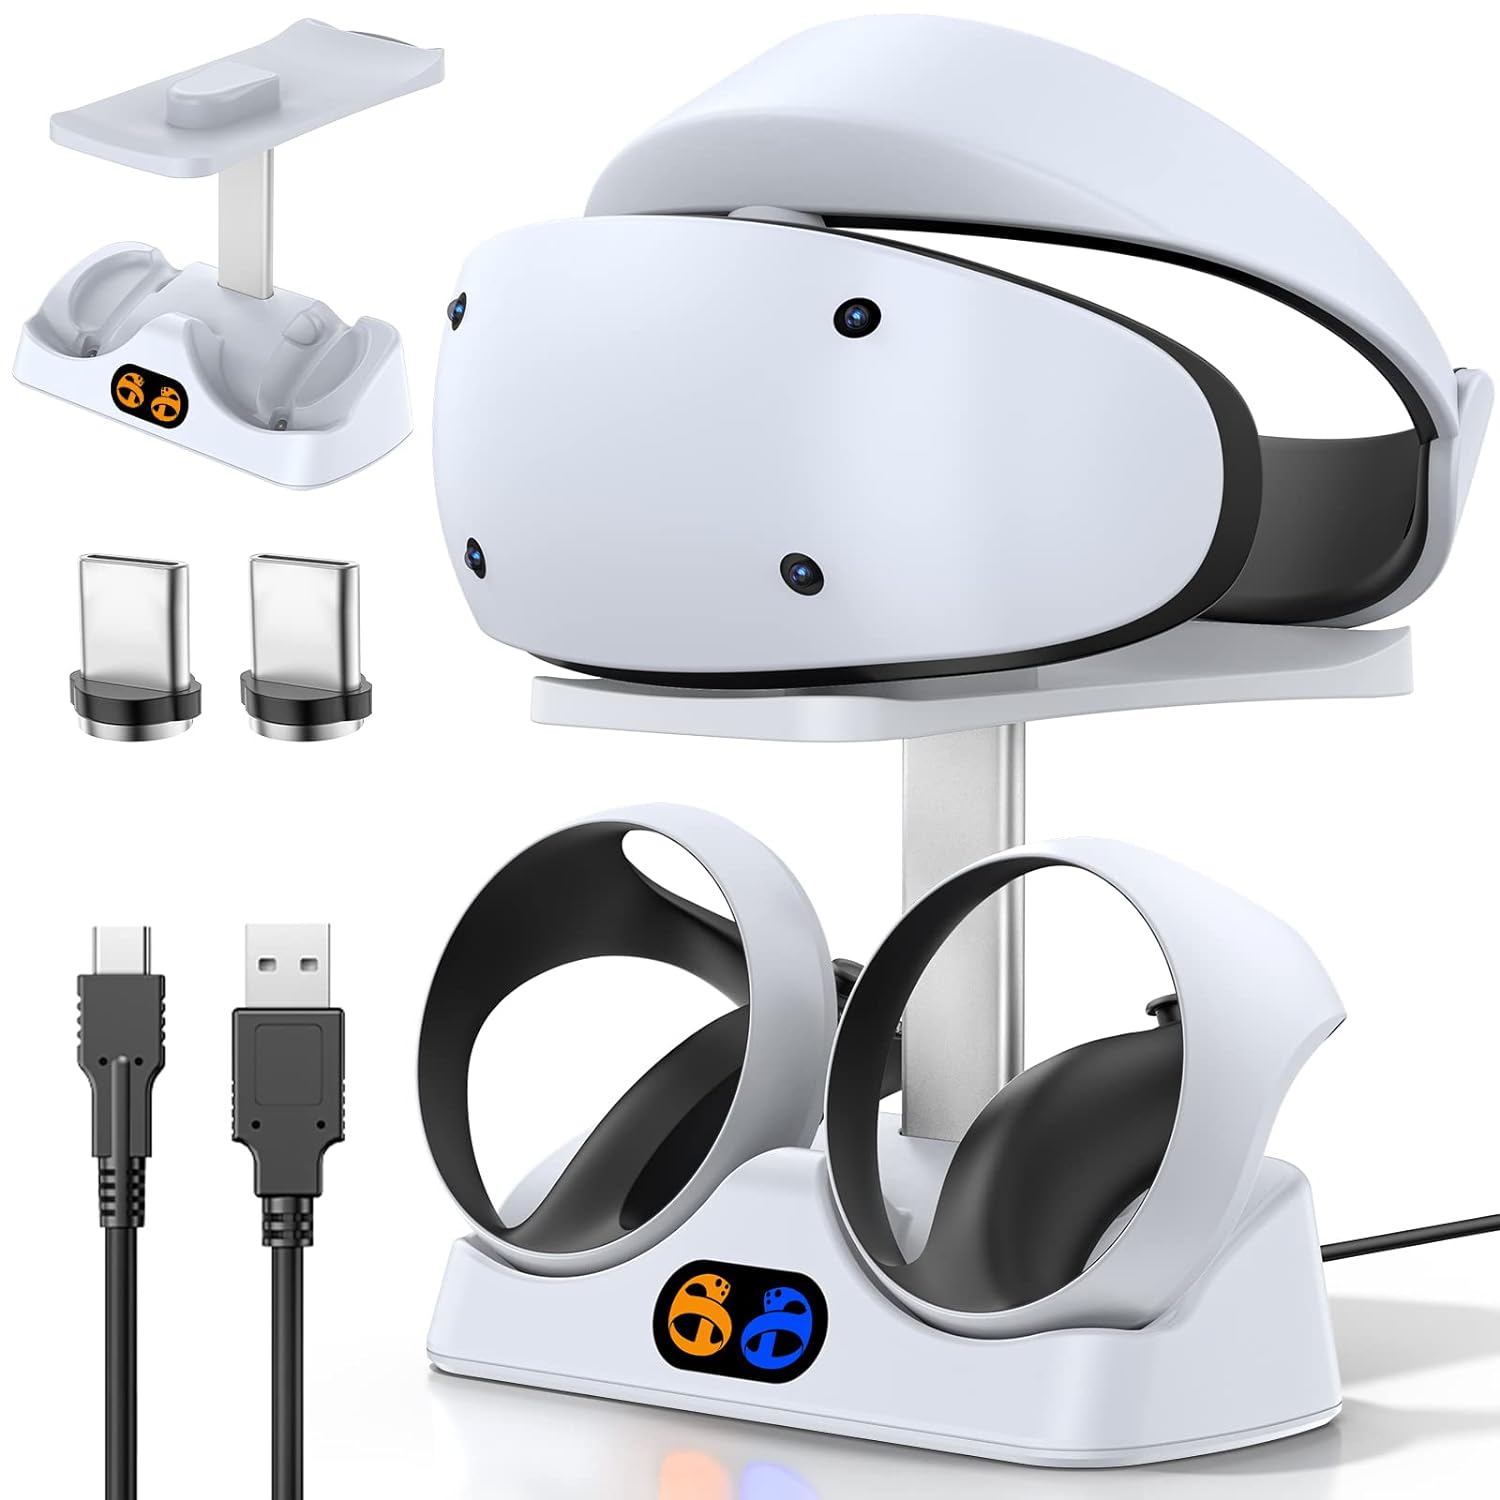 Tokluck Charging Dock for PSVR2, 2H Fast Charging Station for PS VR2 Controllers, PSVR2 Charger with VR2 Glasses Holder, Magnetic Connector and Type-C Cable, PS VR2 Accessories